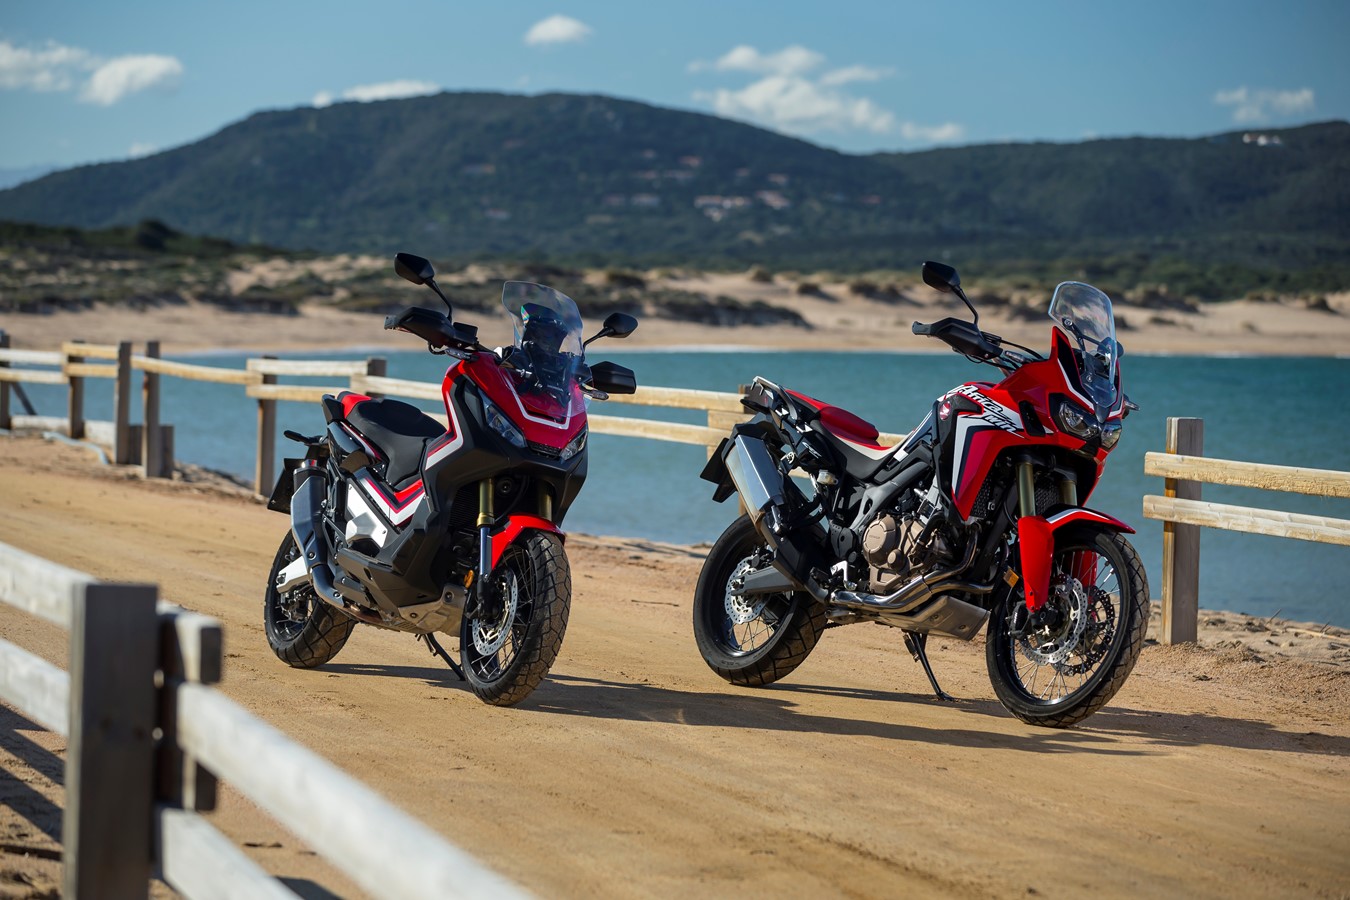 17YM X-ADV and 16YM Africa Twin